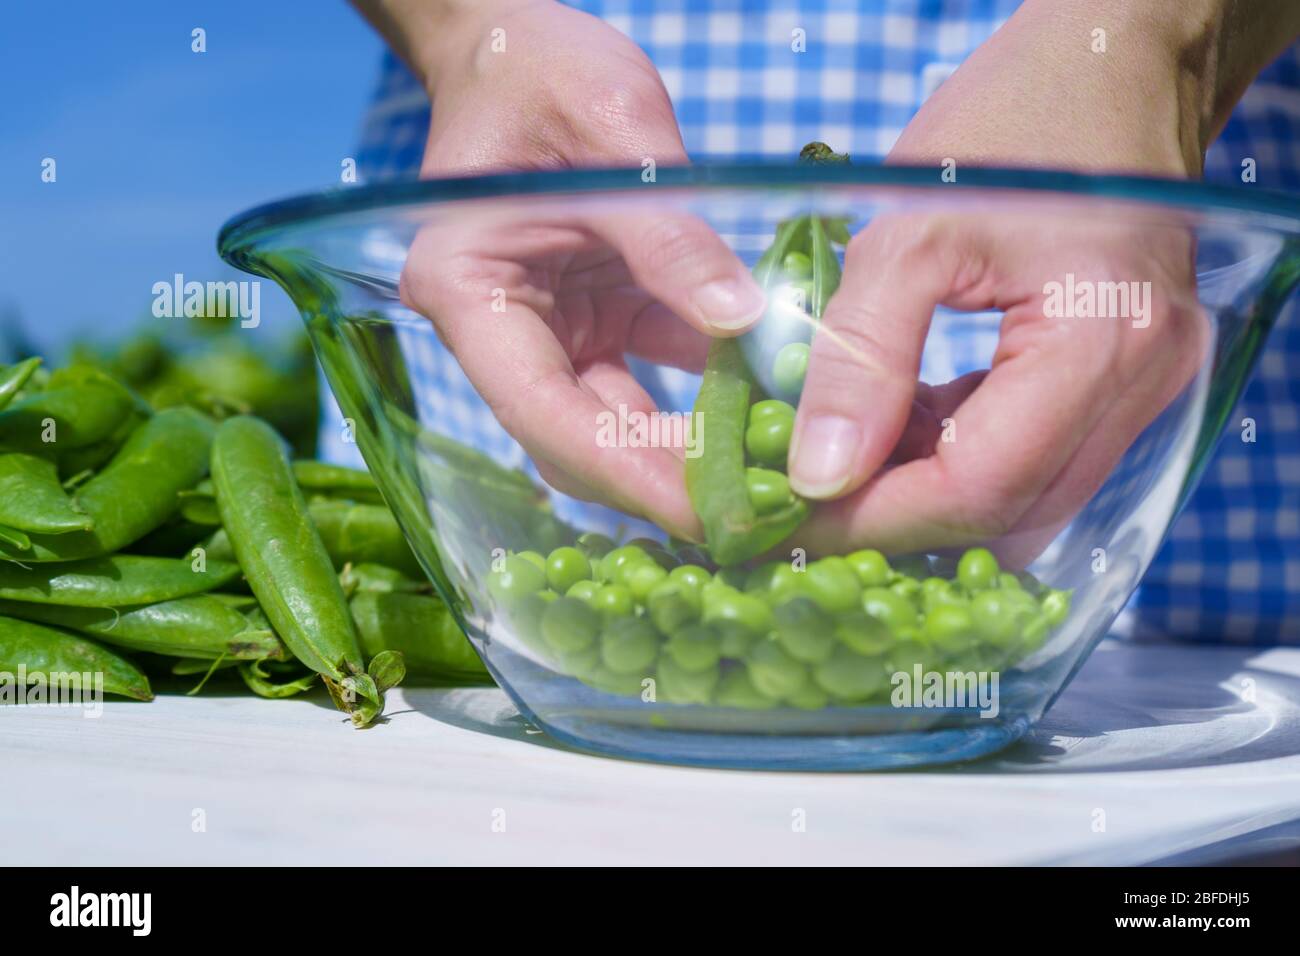 Woman with apron shells peas inside a glass bowl outdoors with strong sunlight in the greenery and blue skies Stock Photo